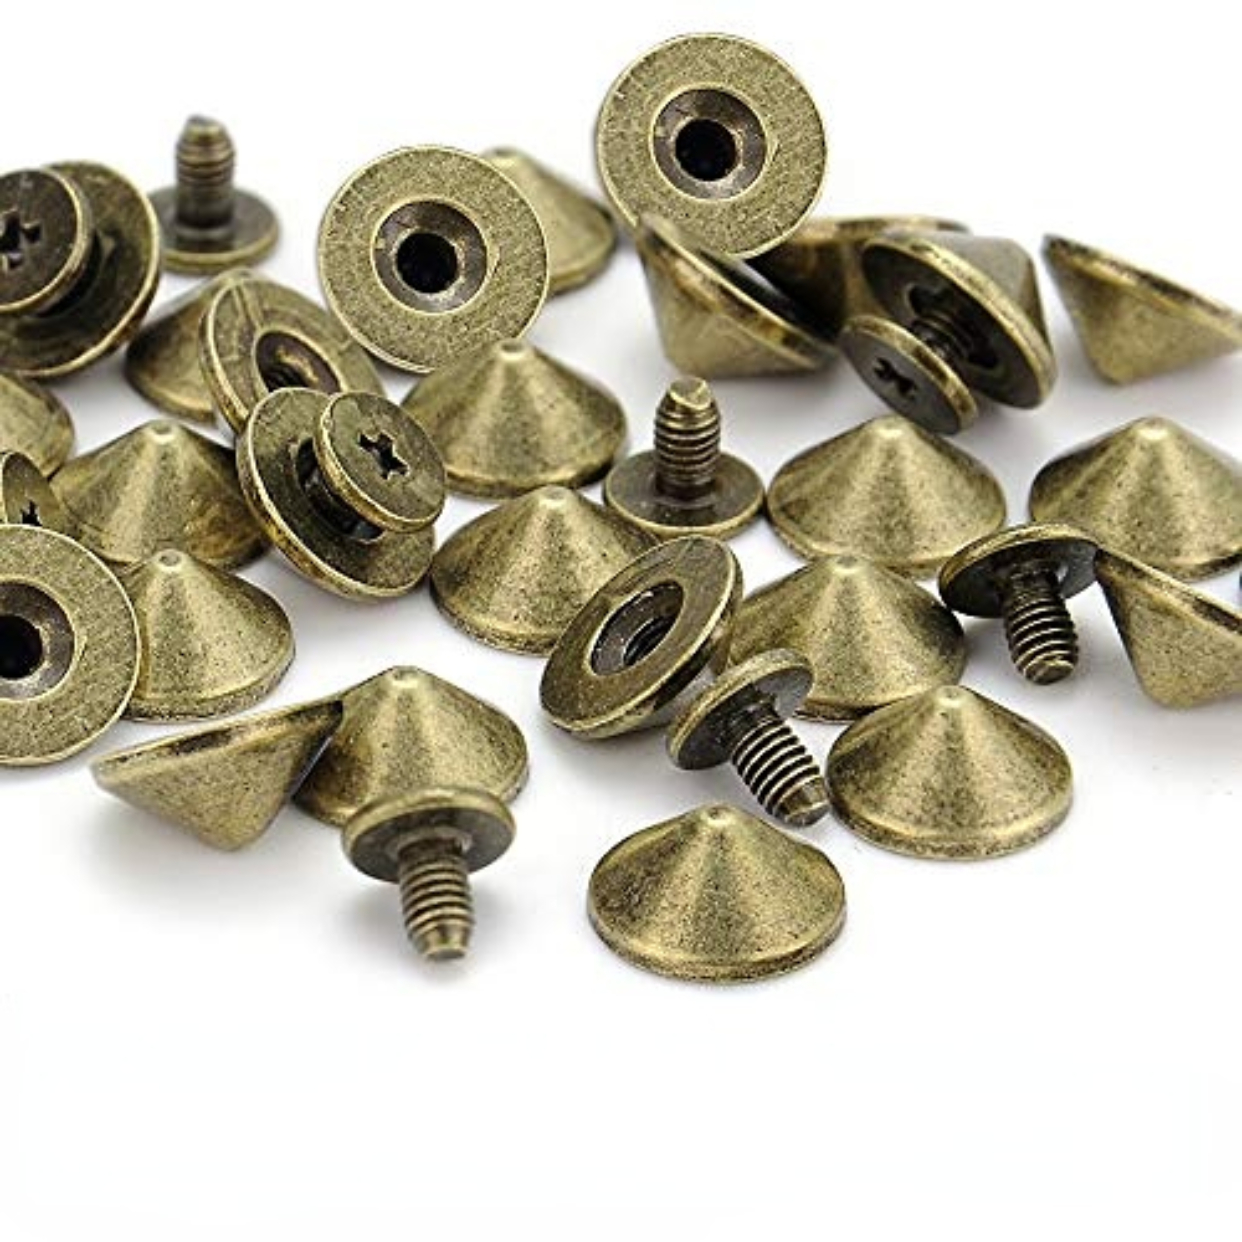 30pcs Punk Spikes Studs Cool Metal Spikes Rivet for DIY Leather Craft  Collar Belt Bags 